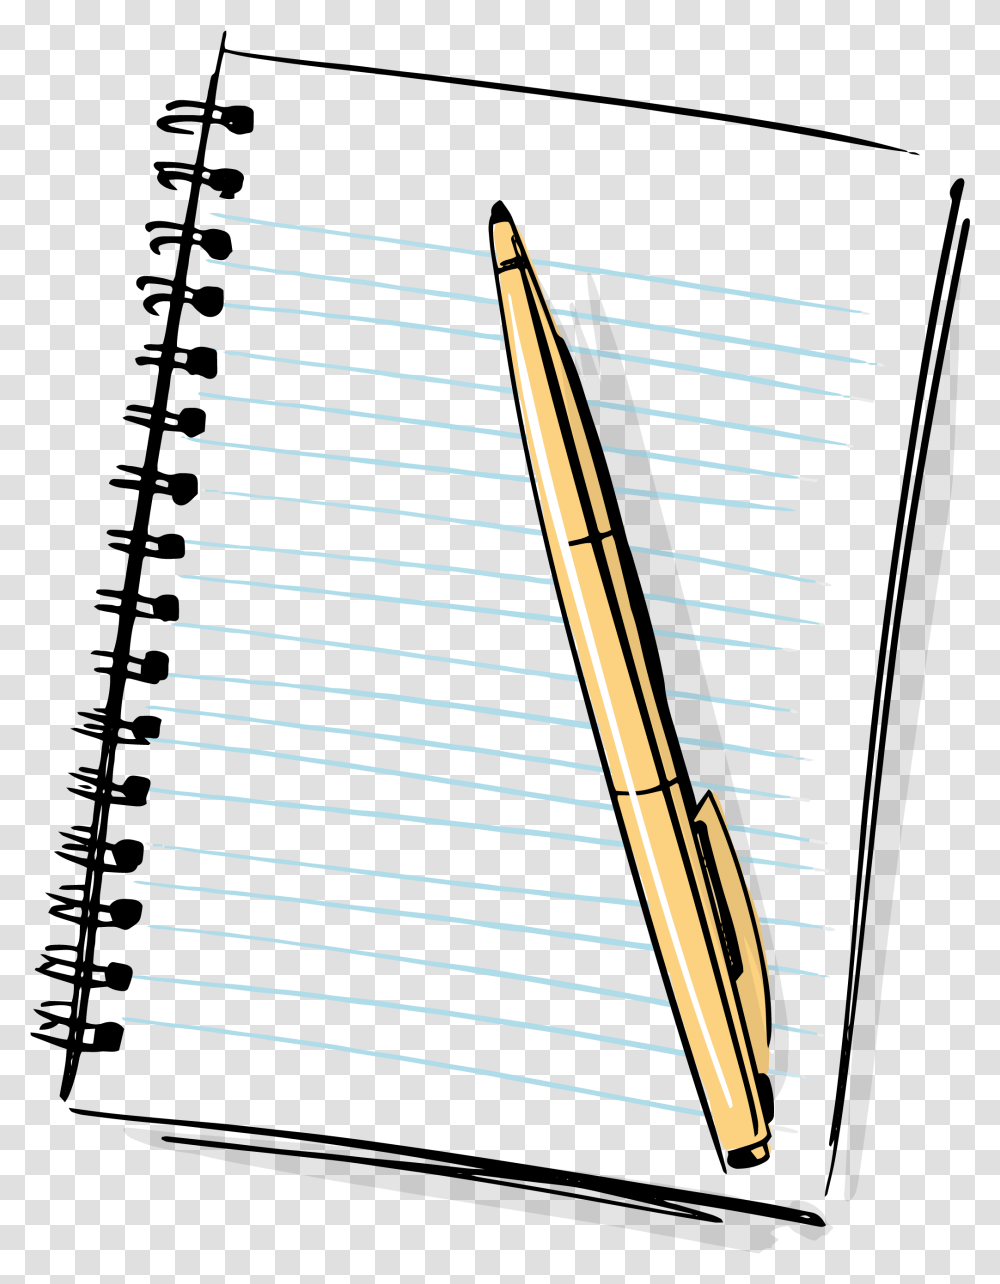 Pen And Notebook Clipart Pen And Paper Background, Electrical Device, Antenna, Staircase Transparent Png